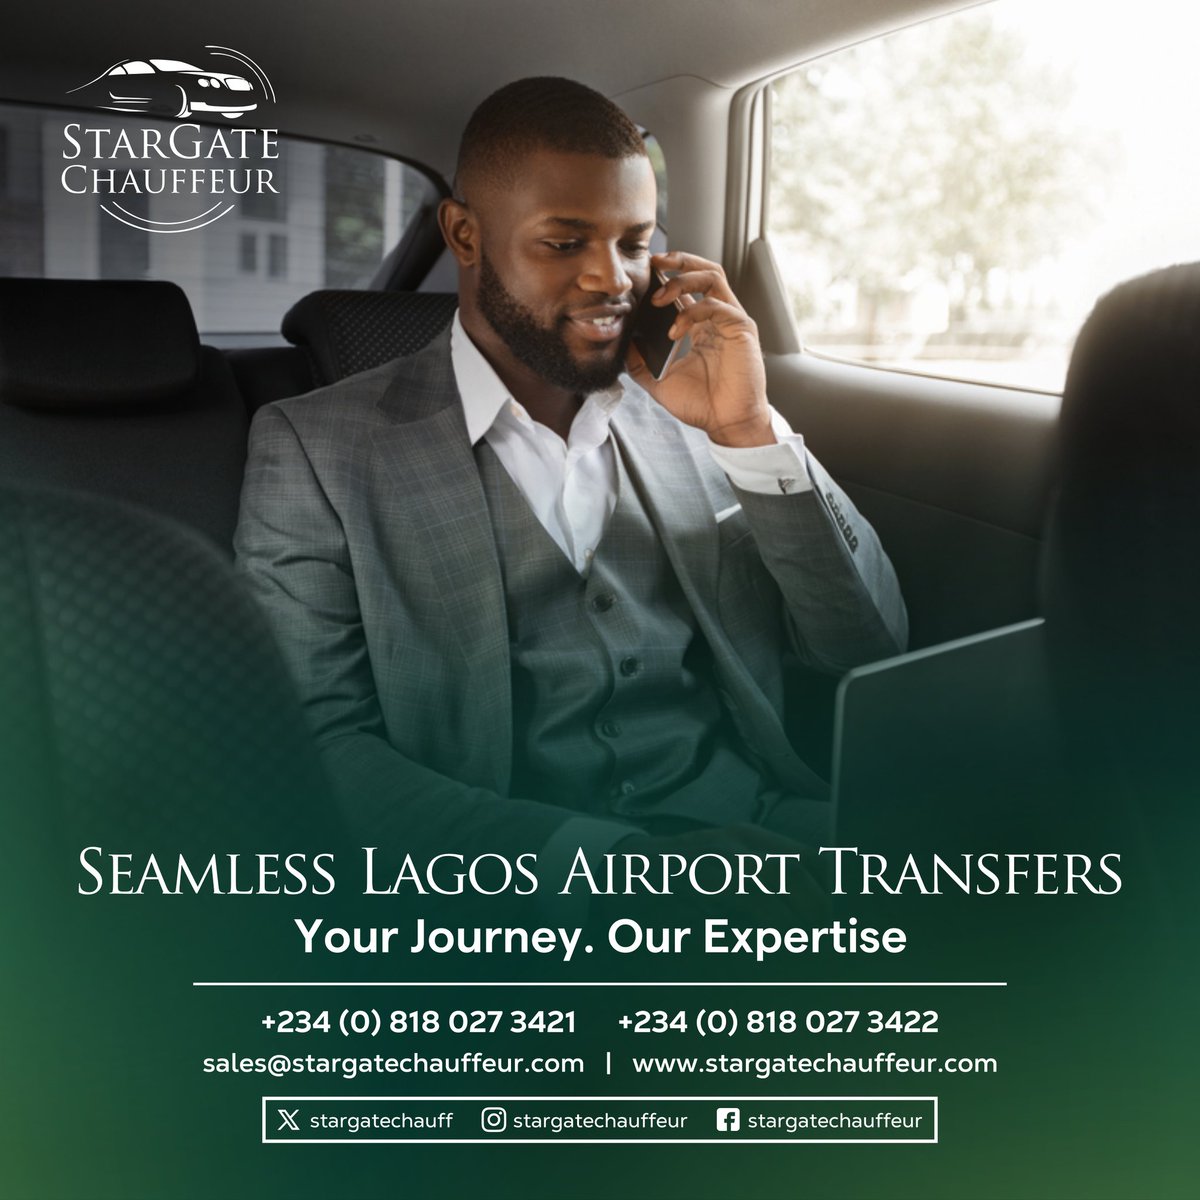 Don’t be stranded for your flight when you have STARGATE CHAUFFEUR! 💯 
Seamless and Timely Airport Transfer in comfort is what we do best.

Book a ride now!
Send a DM or Call/WhatsApp
08180273421
08180273422

#airporttransferlagos #stargatechauffeur #airporttransferservice